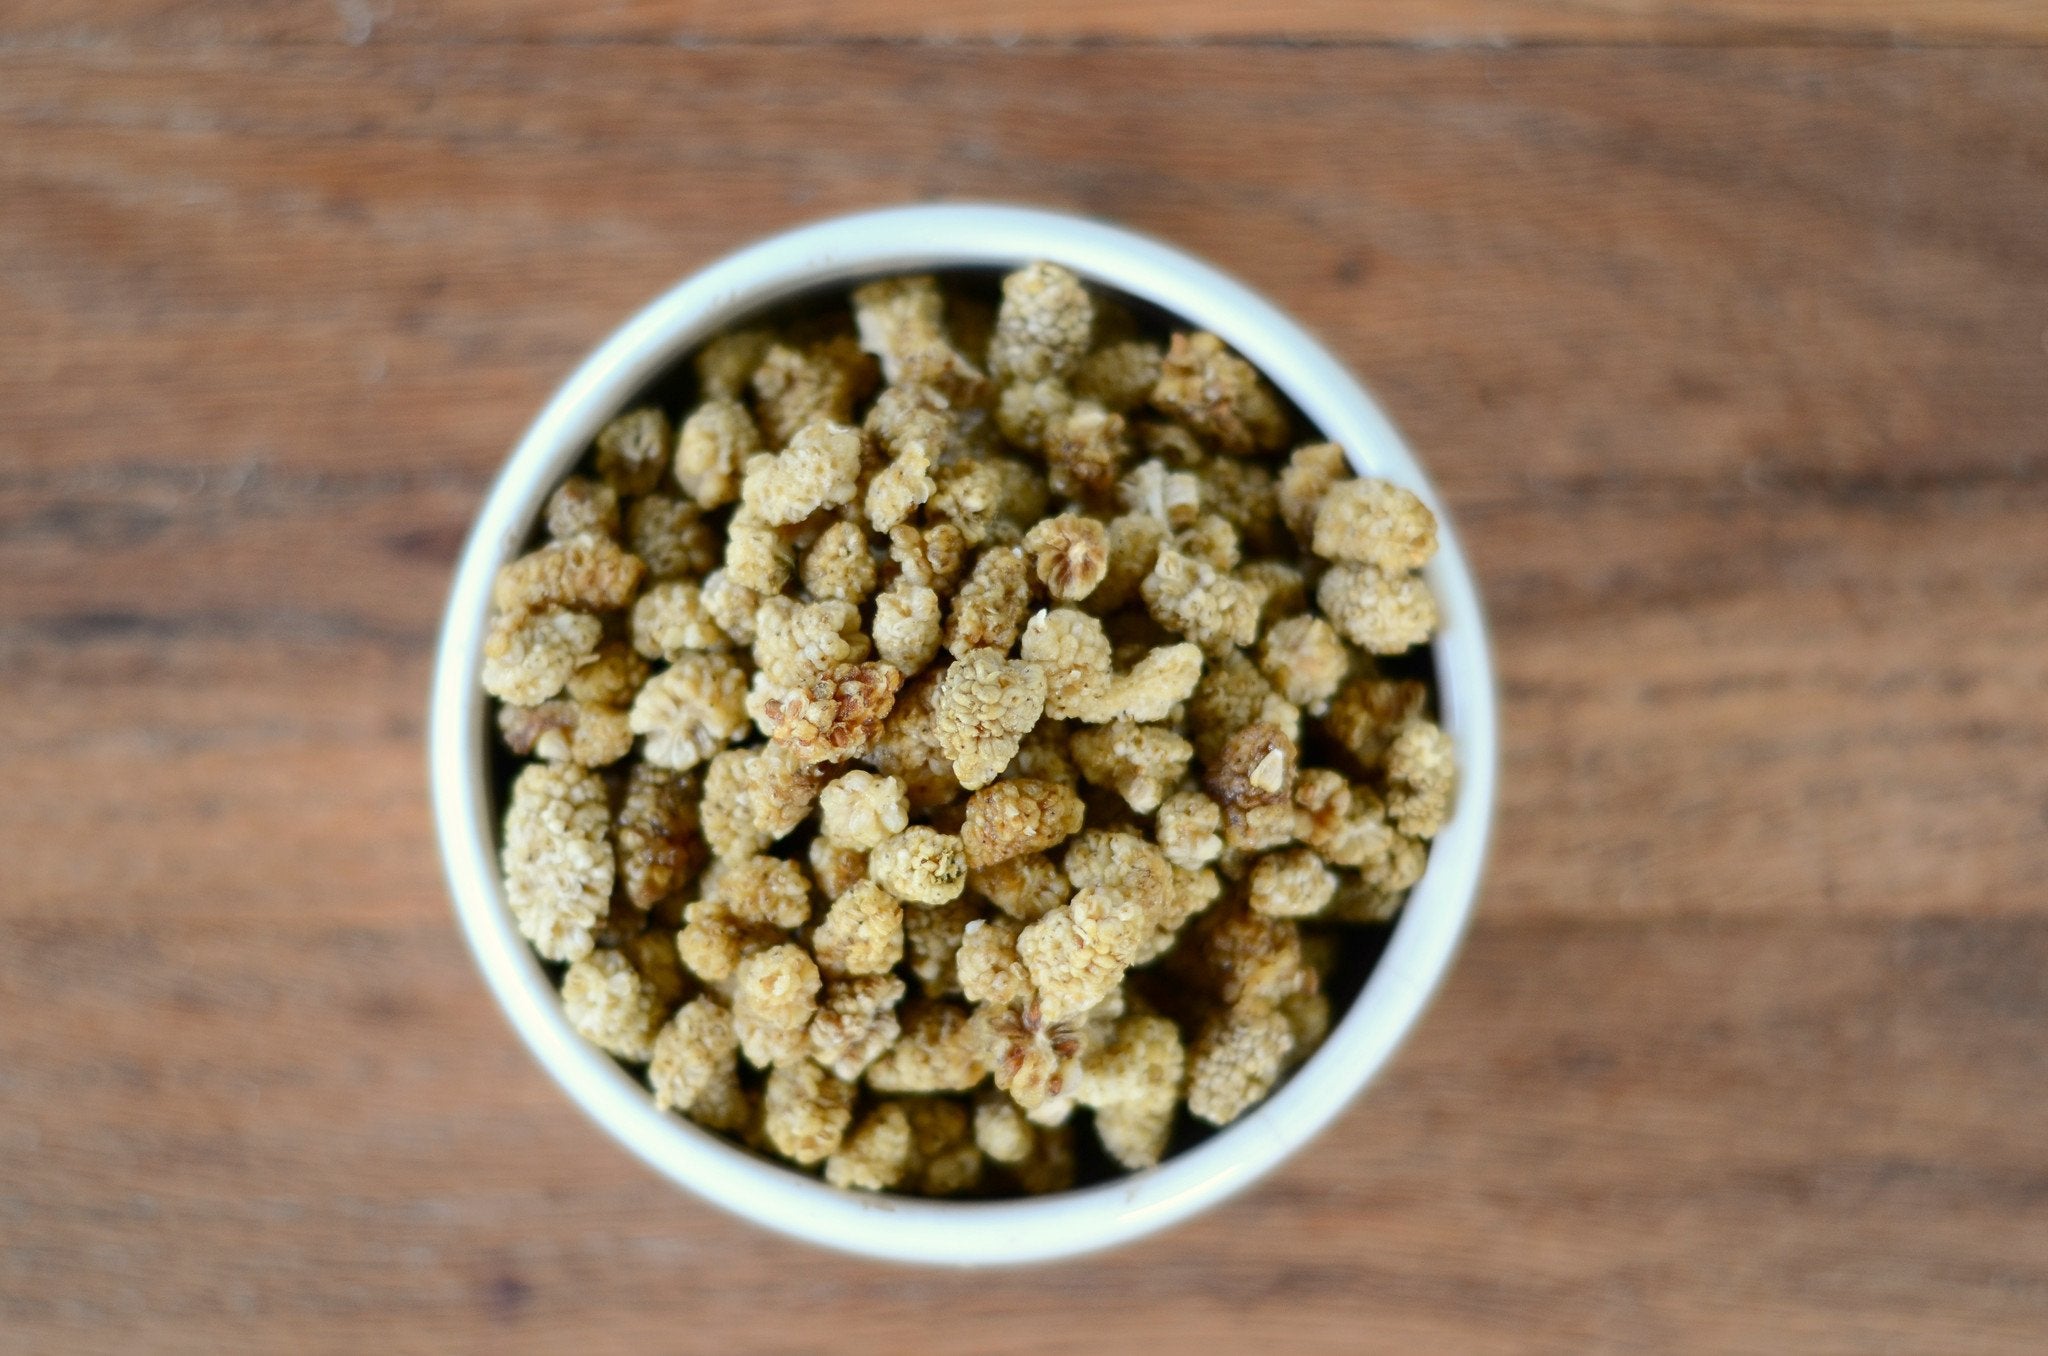 This is an image of a small white bowl containing Organic White Mulberries from Anthony's Goods